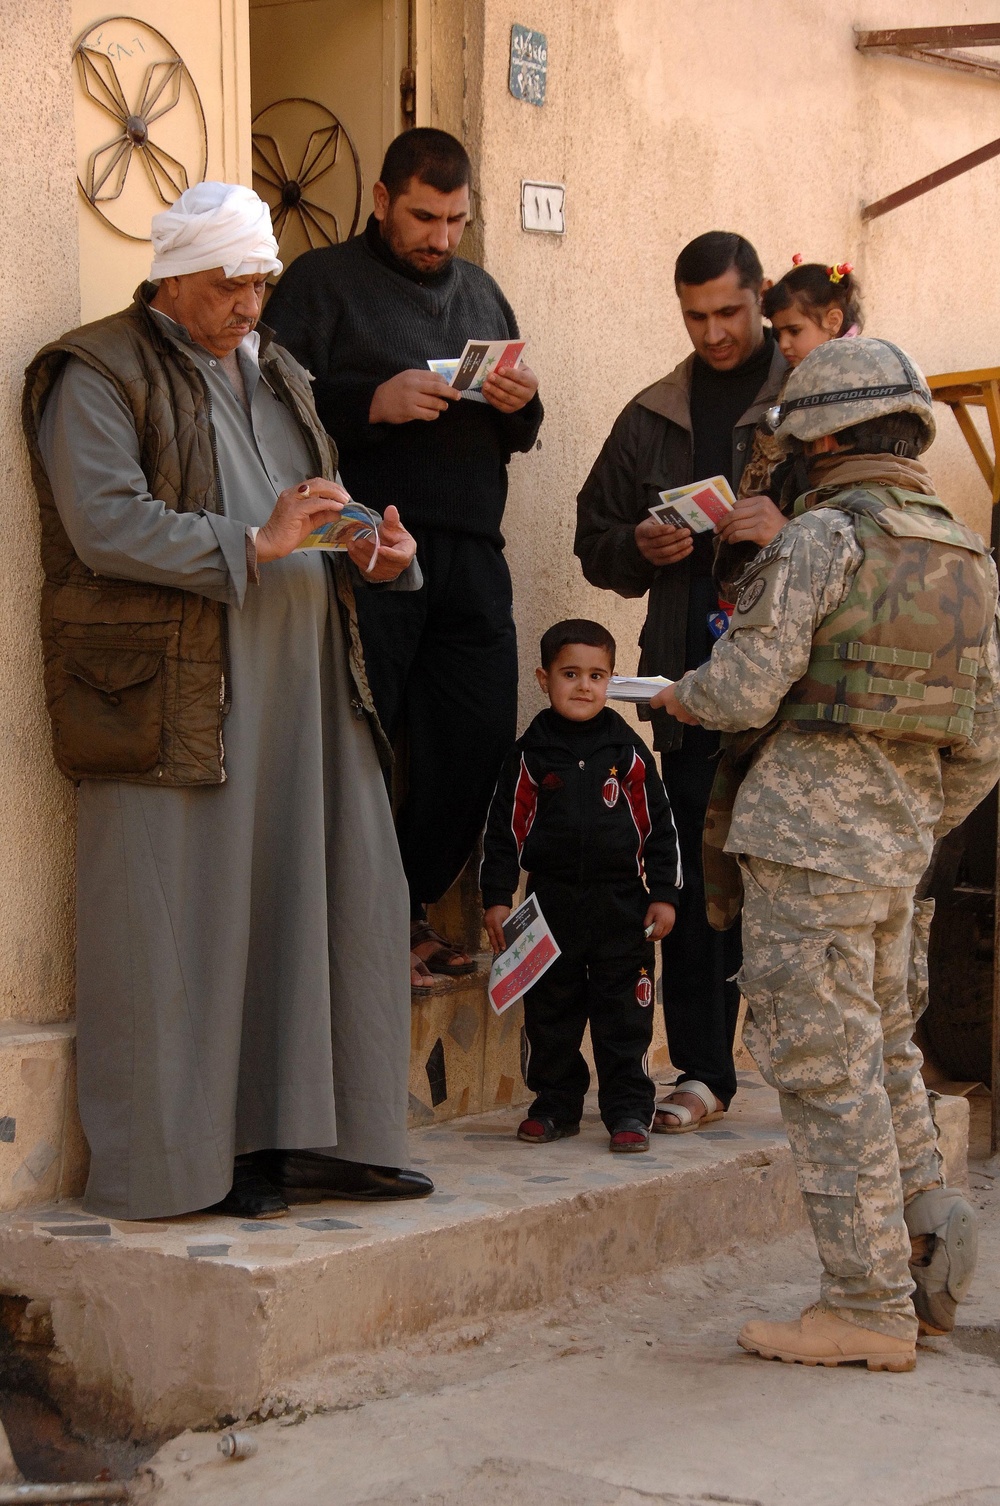 Soldier passes out wanted posters to locals